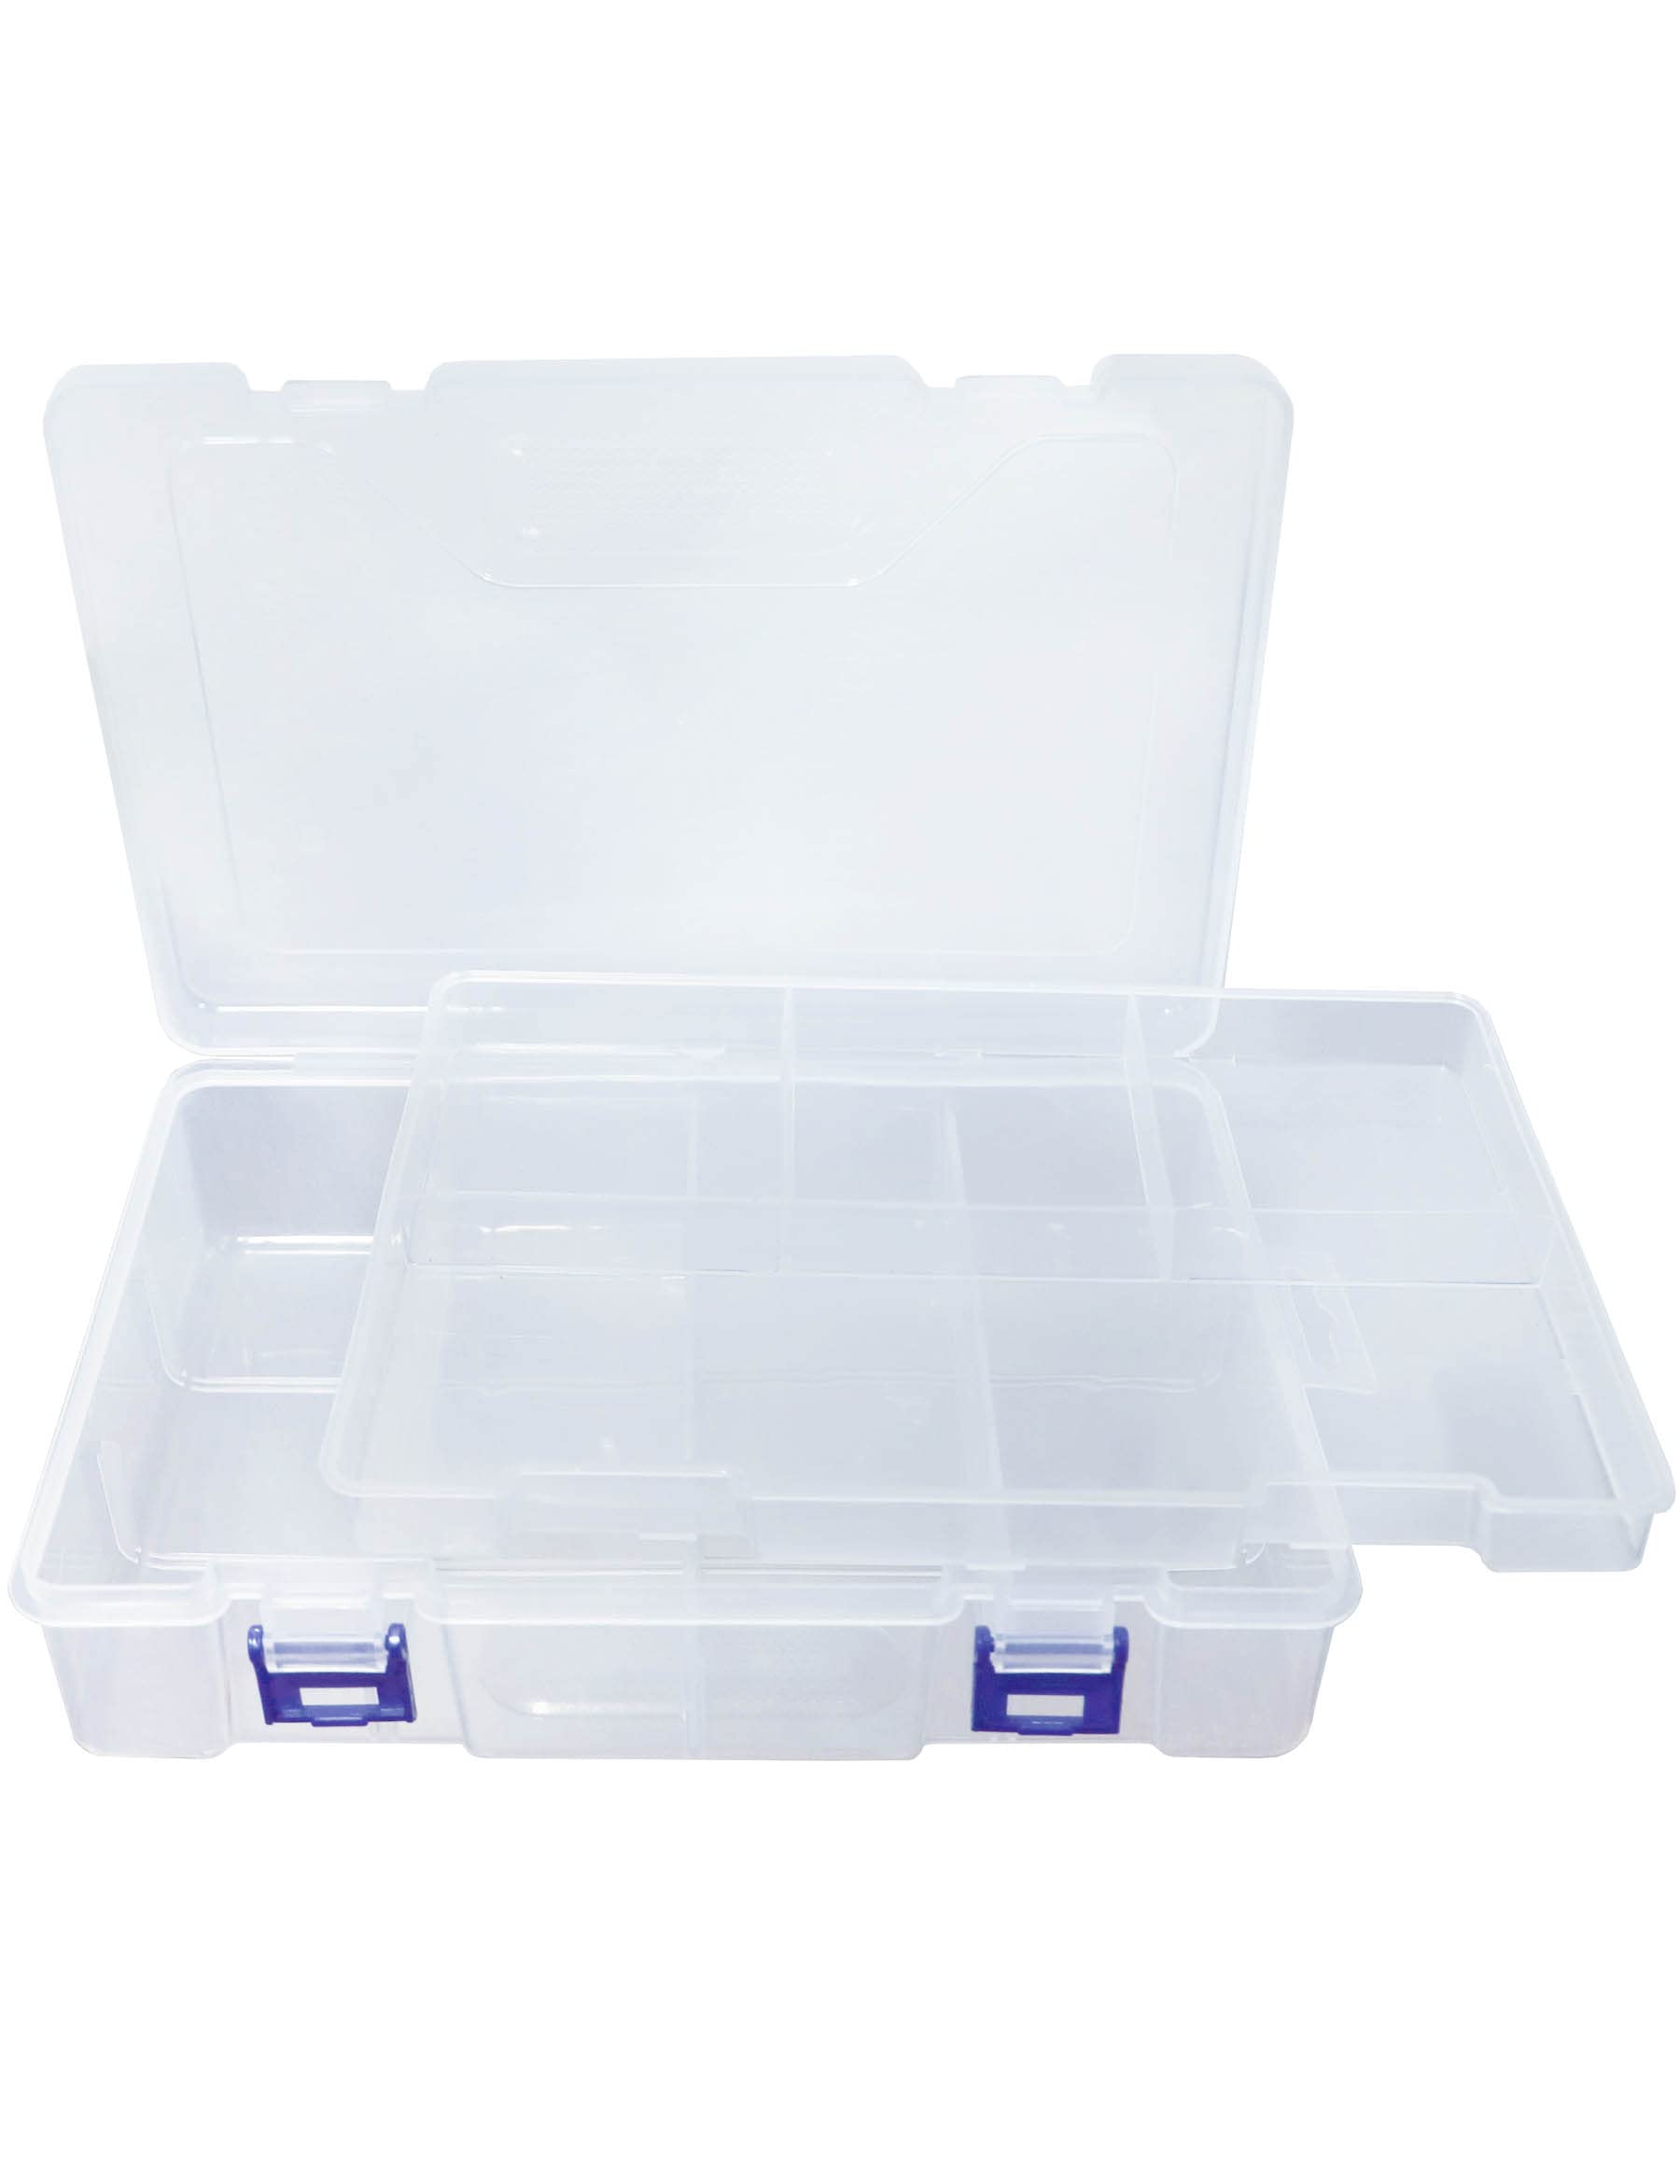 Tailored Tackle Boxes, Plastic Box, Plastic Storage Organizer Box with  Removable Dividers - Fishing Tackle Storage - Box Organizer - 3 Pack Large  or Small Packs 